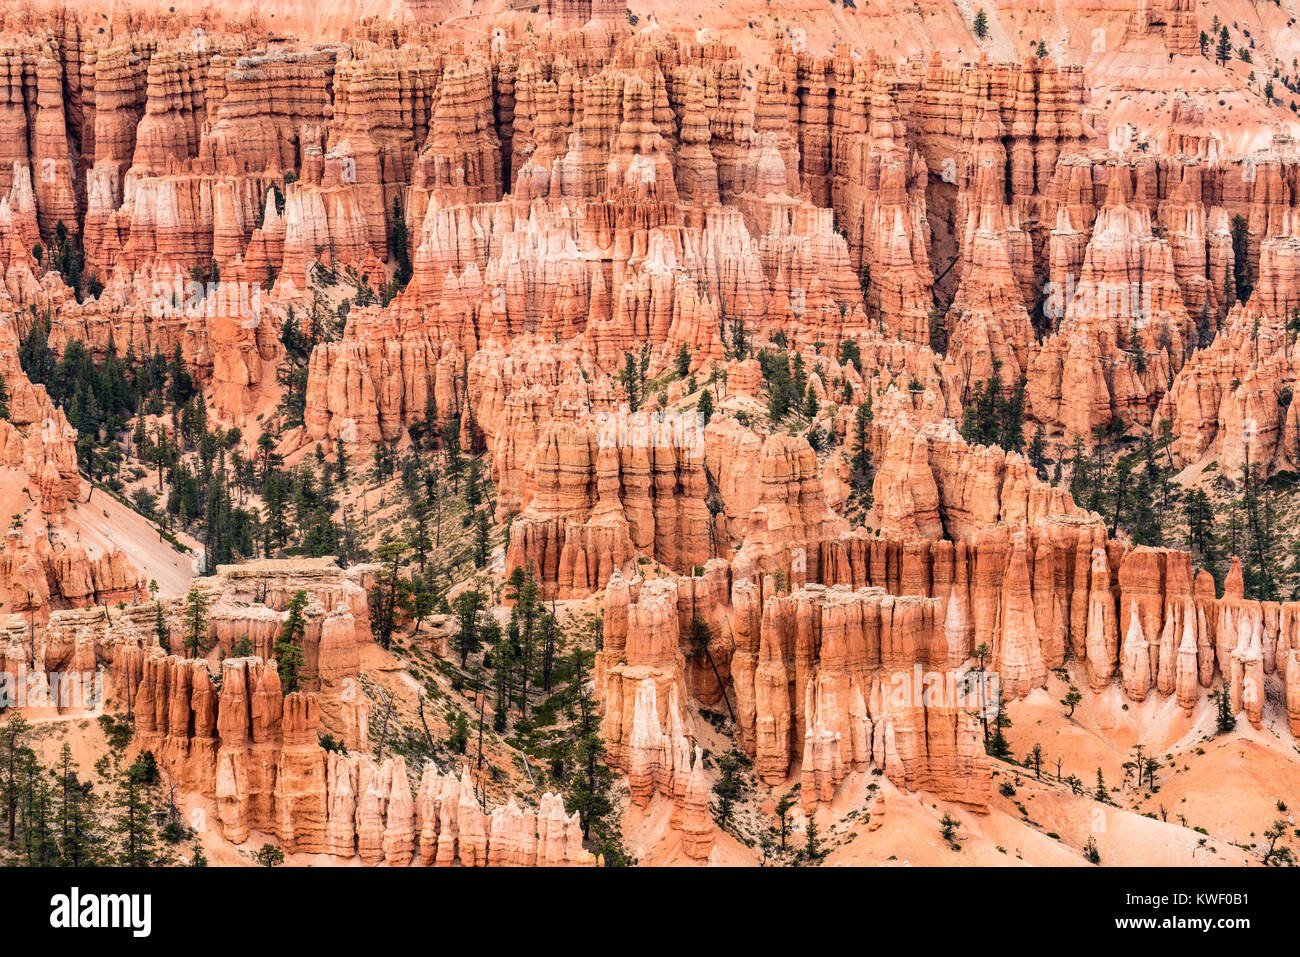 Amazing hoodoo stone formations in the amphitheater of Bryce Canyon National Park, Utah Stock Photo